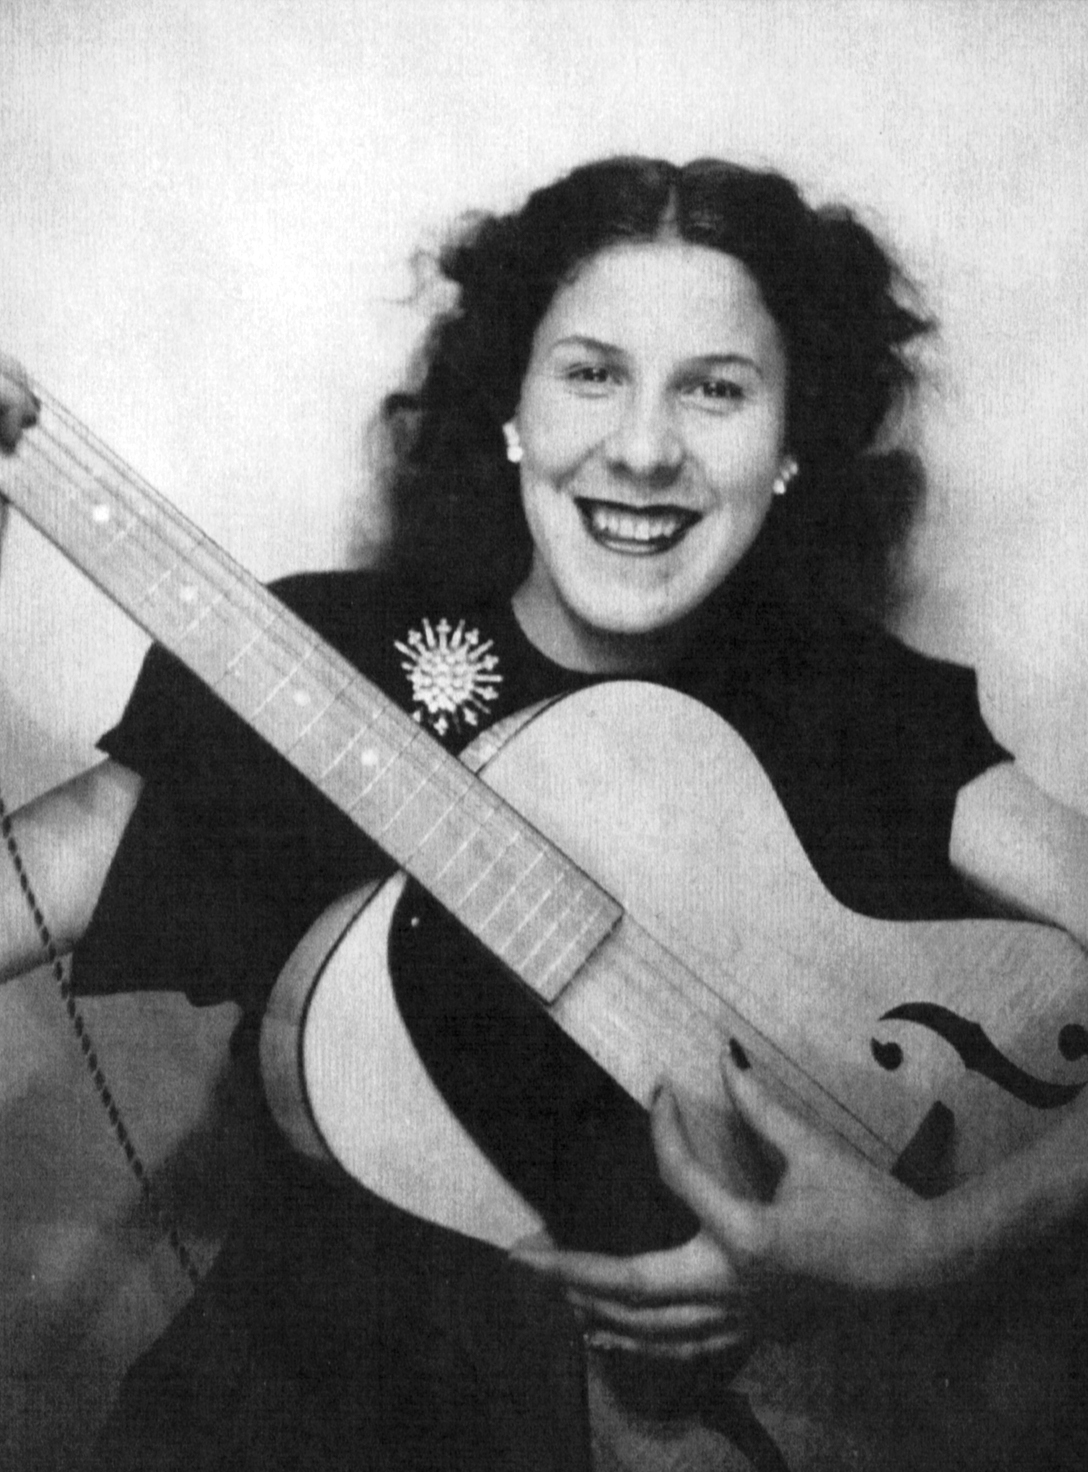 Mémère playing her guitar in her early 20s.